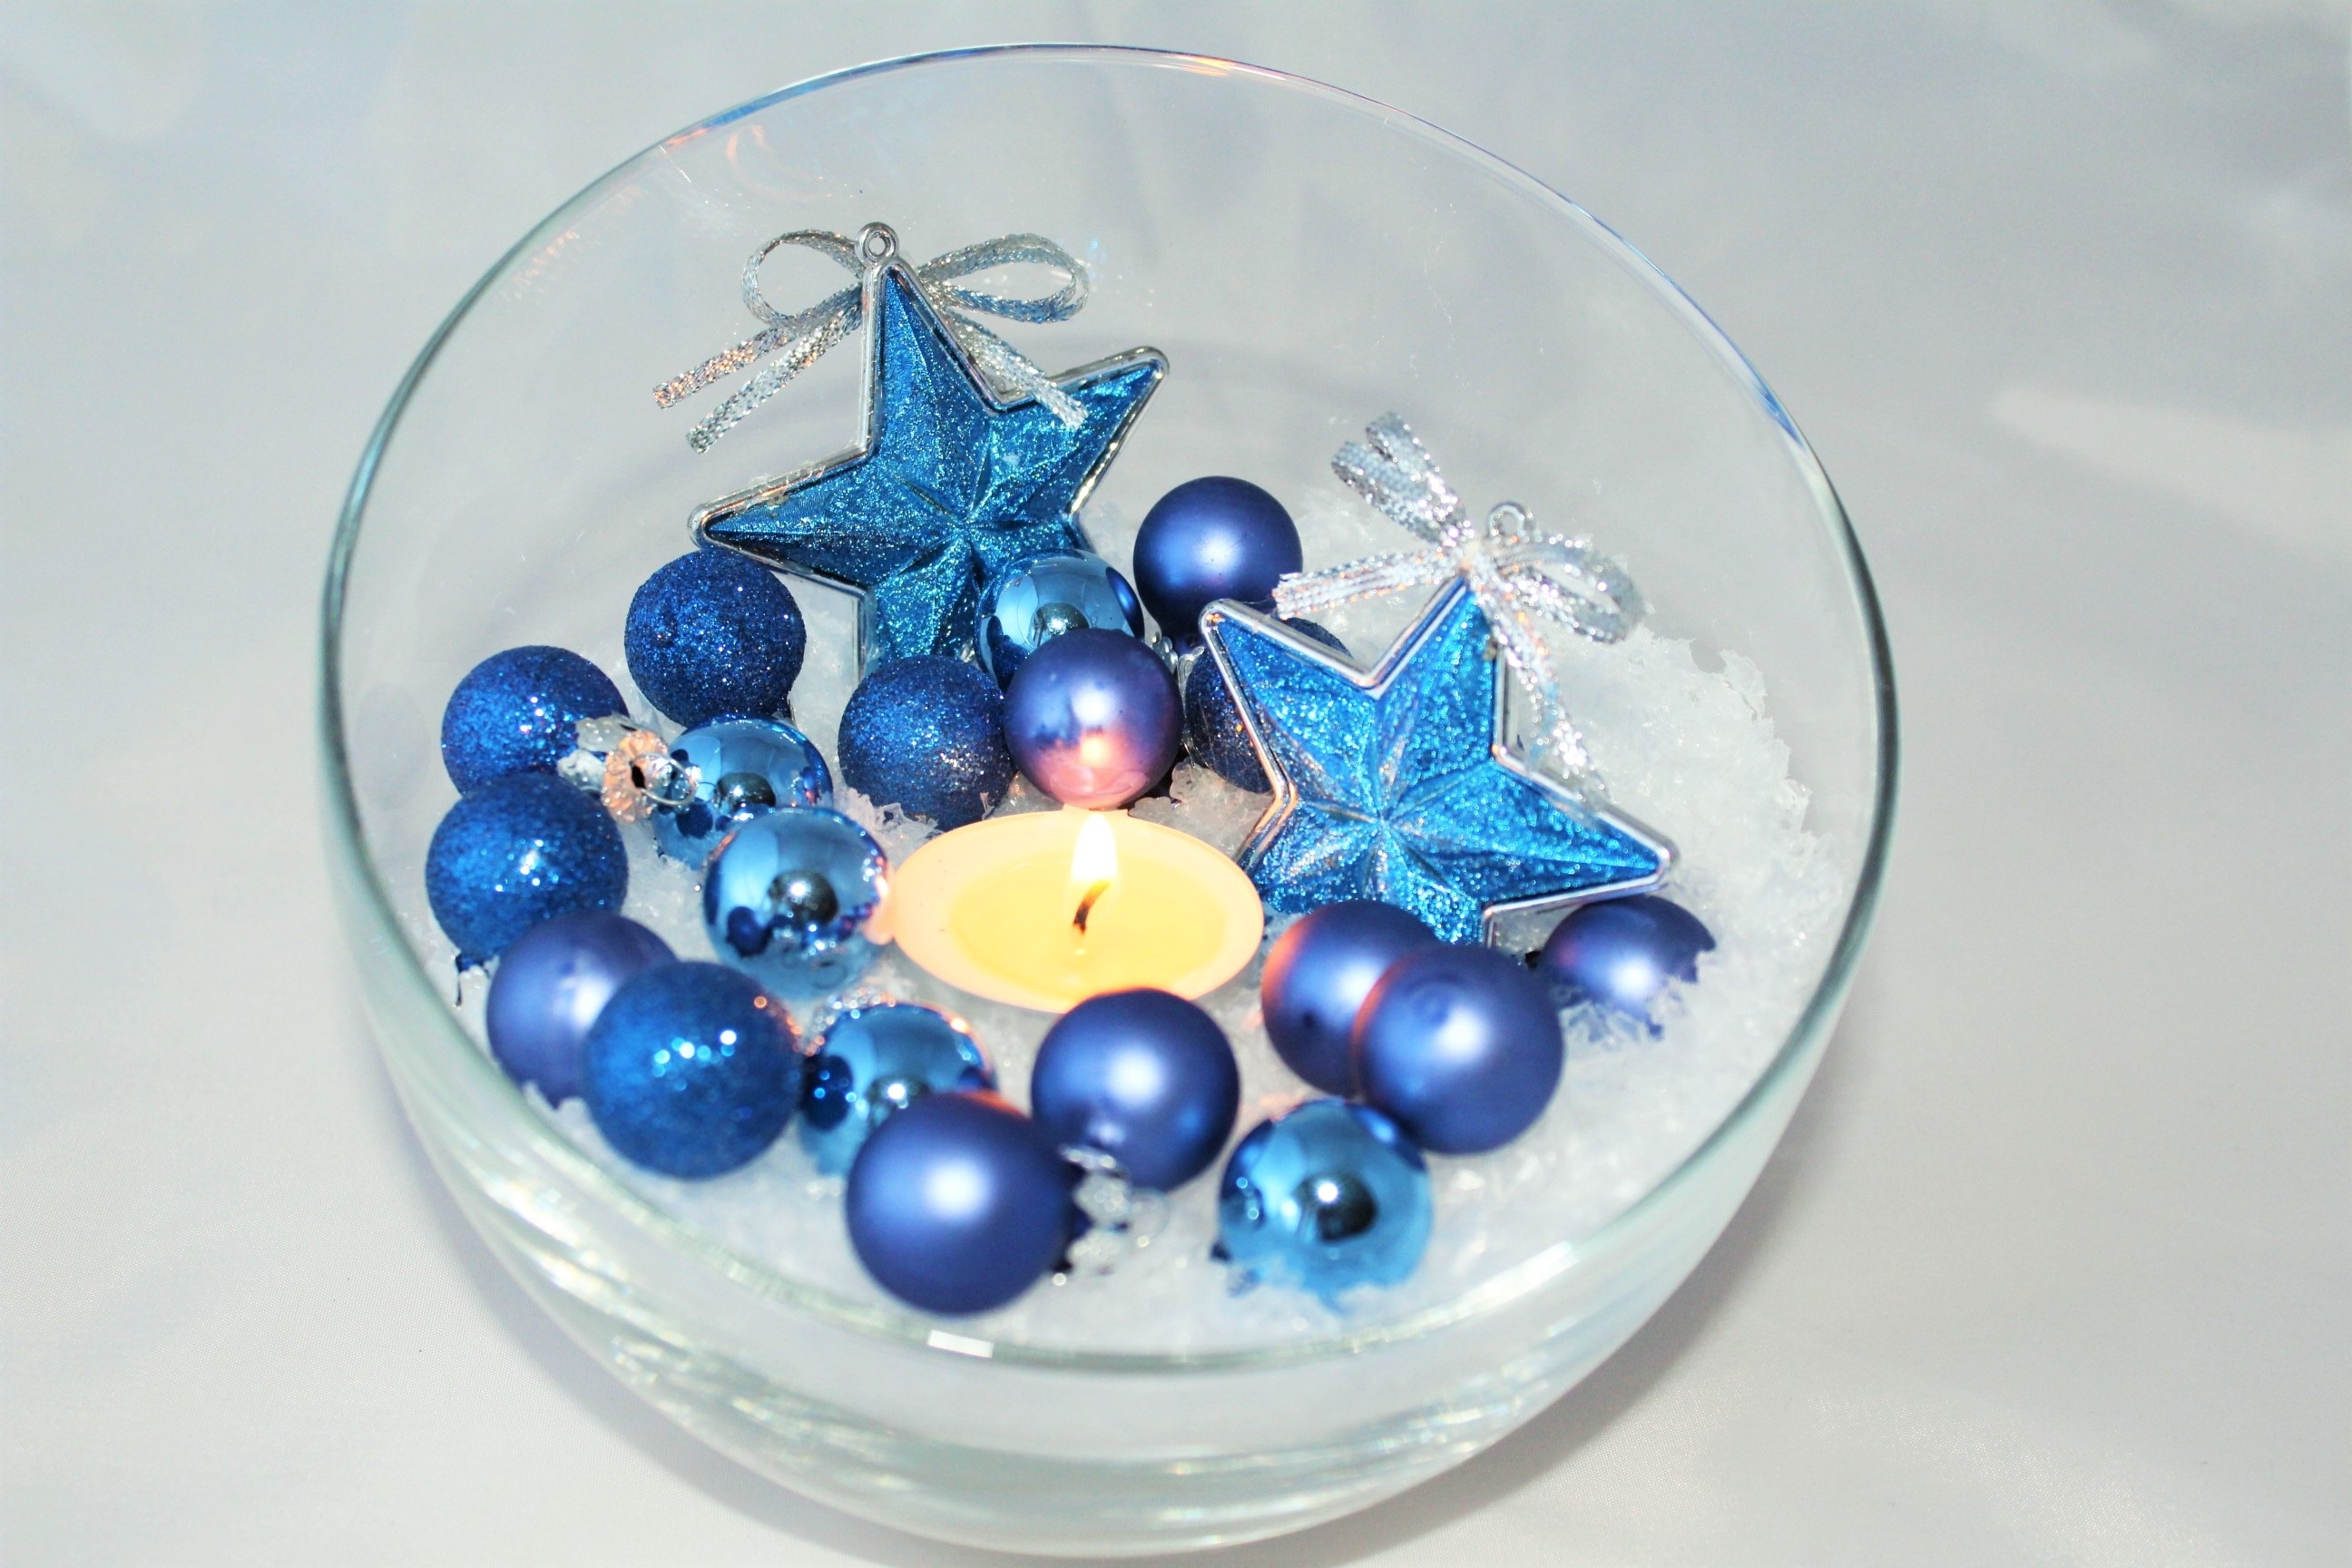 clear glass bowl and blue bauble